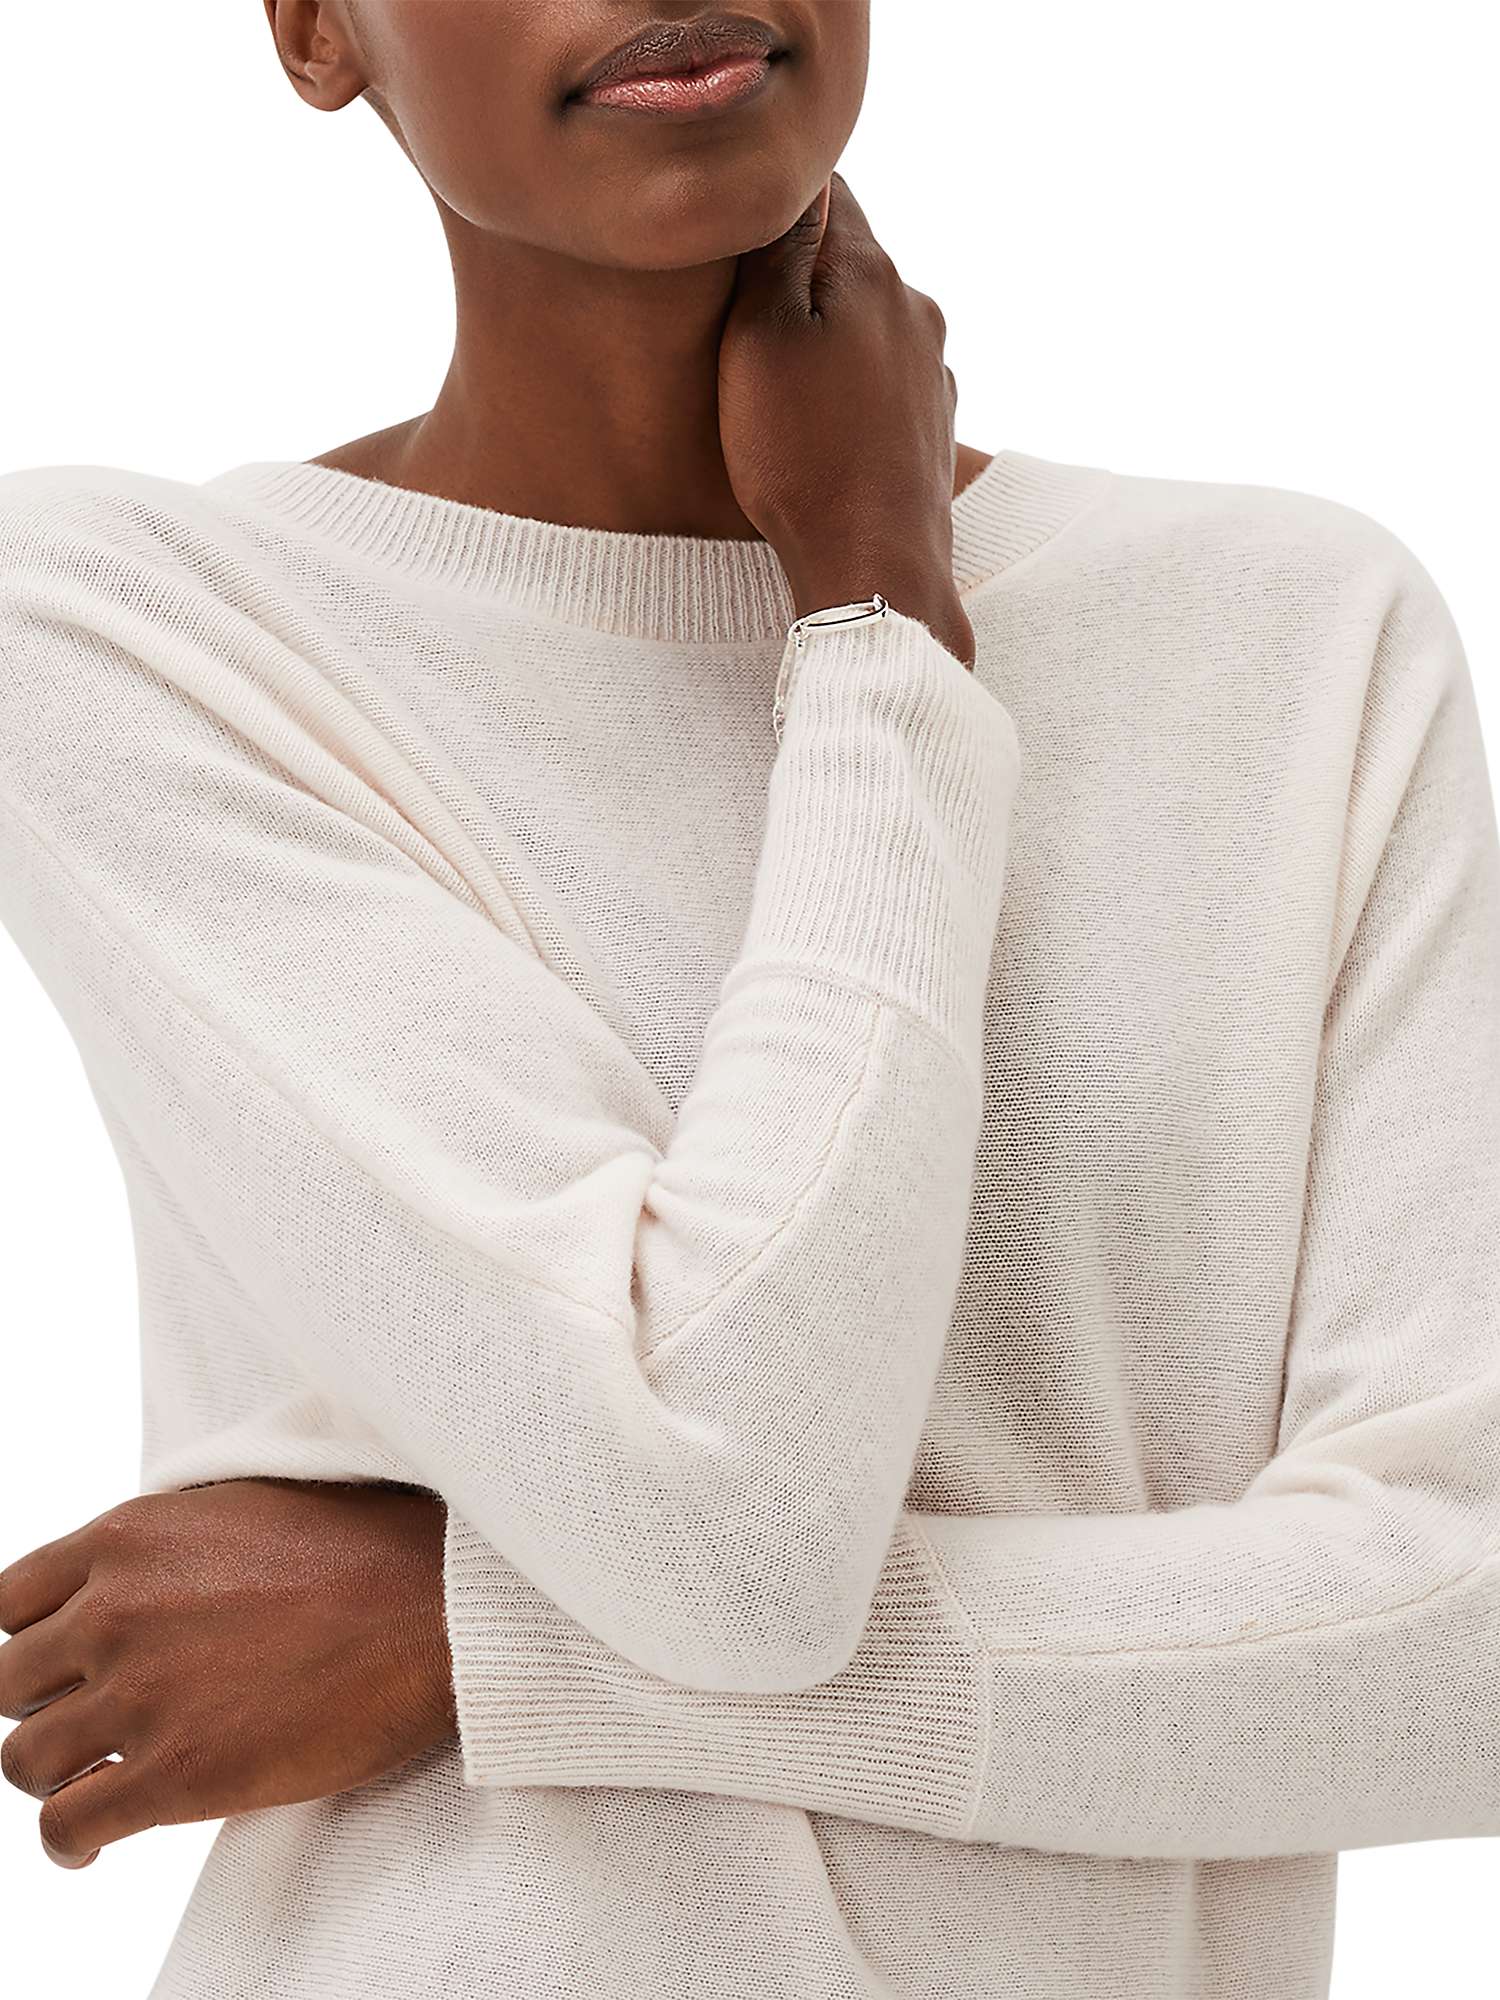 Phase Eight Beatrice Cashmere Jumper, Pale Pink at John Lewis & Partners